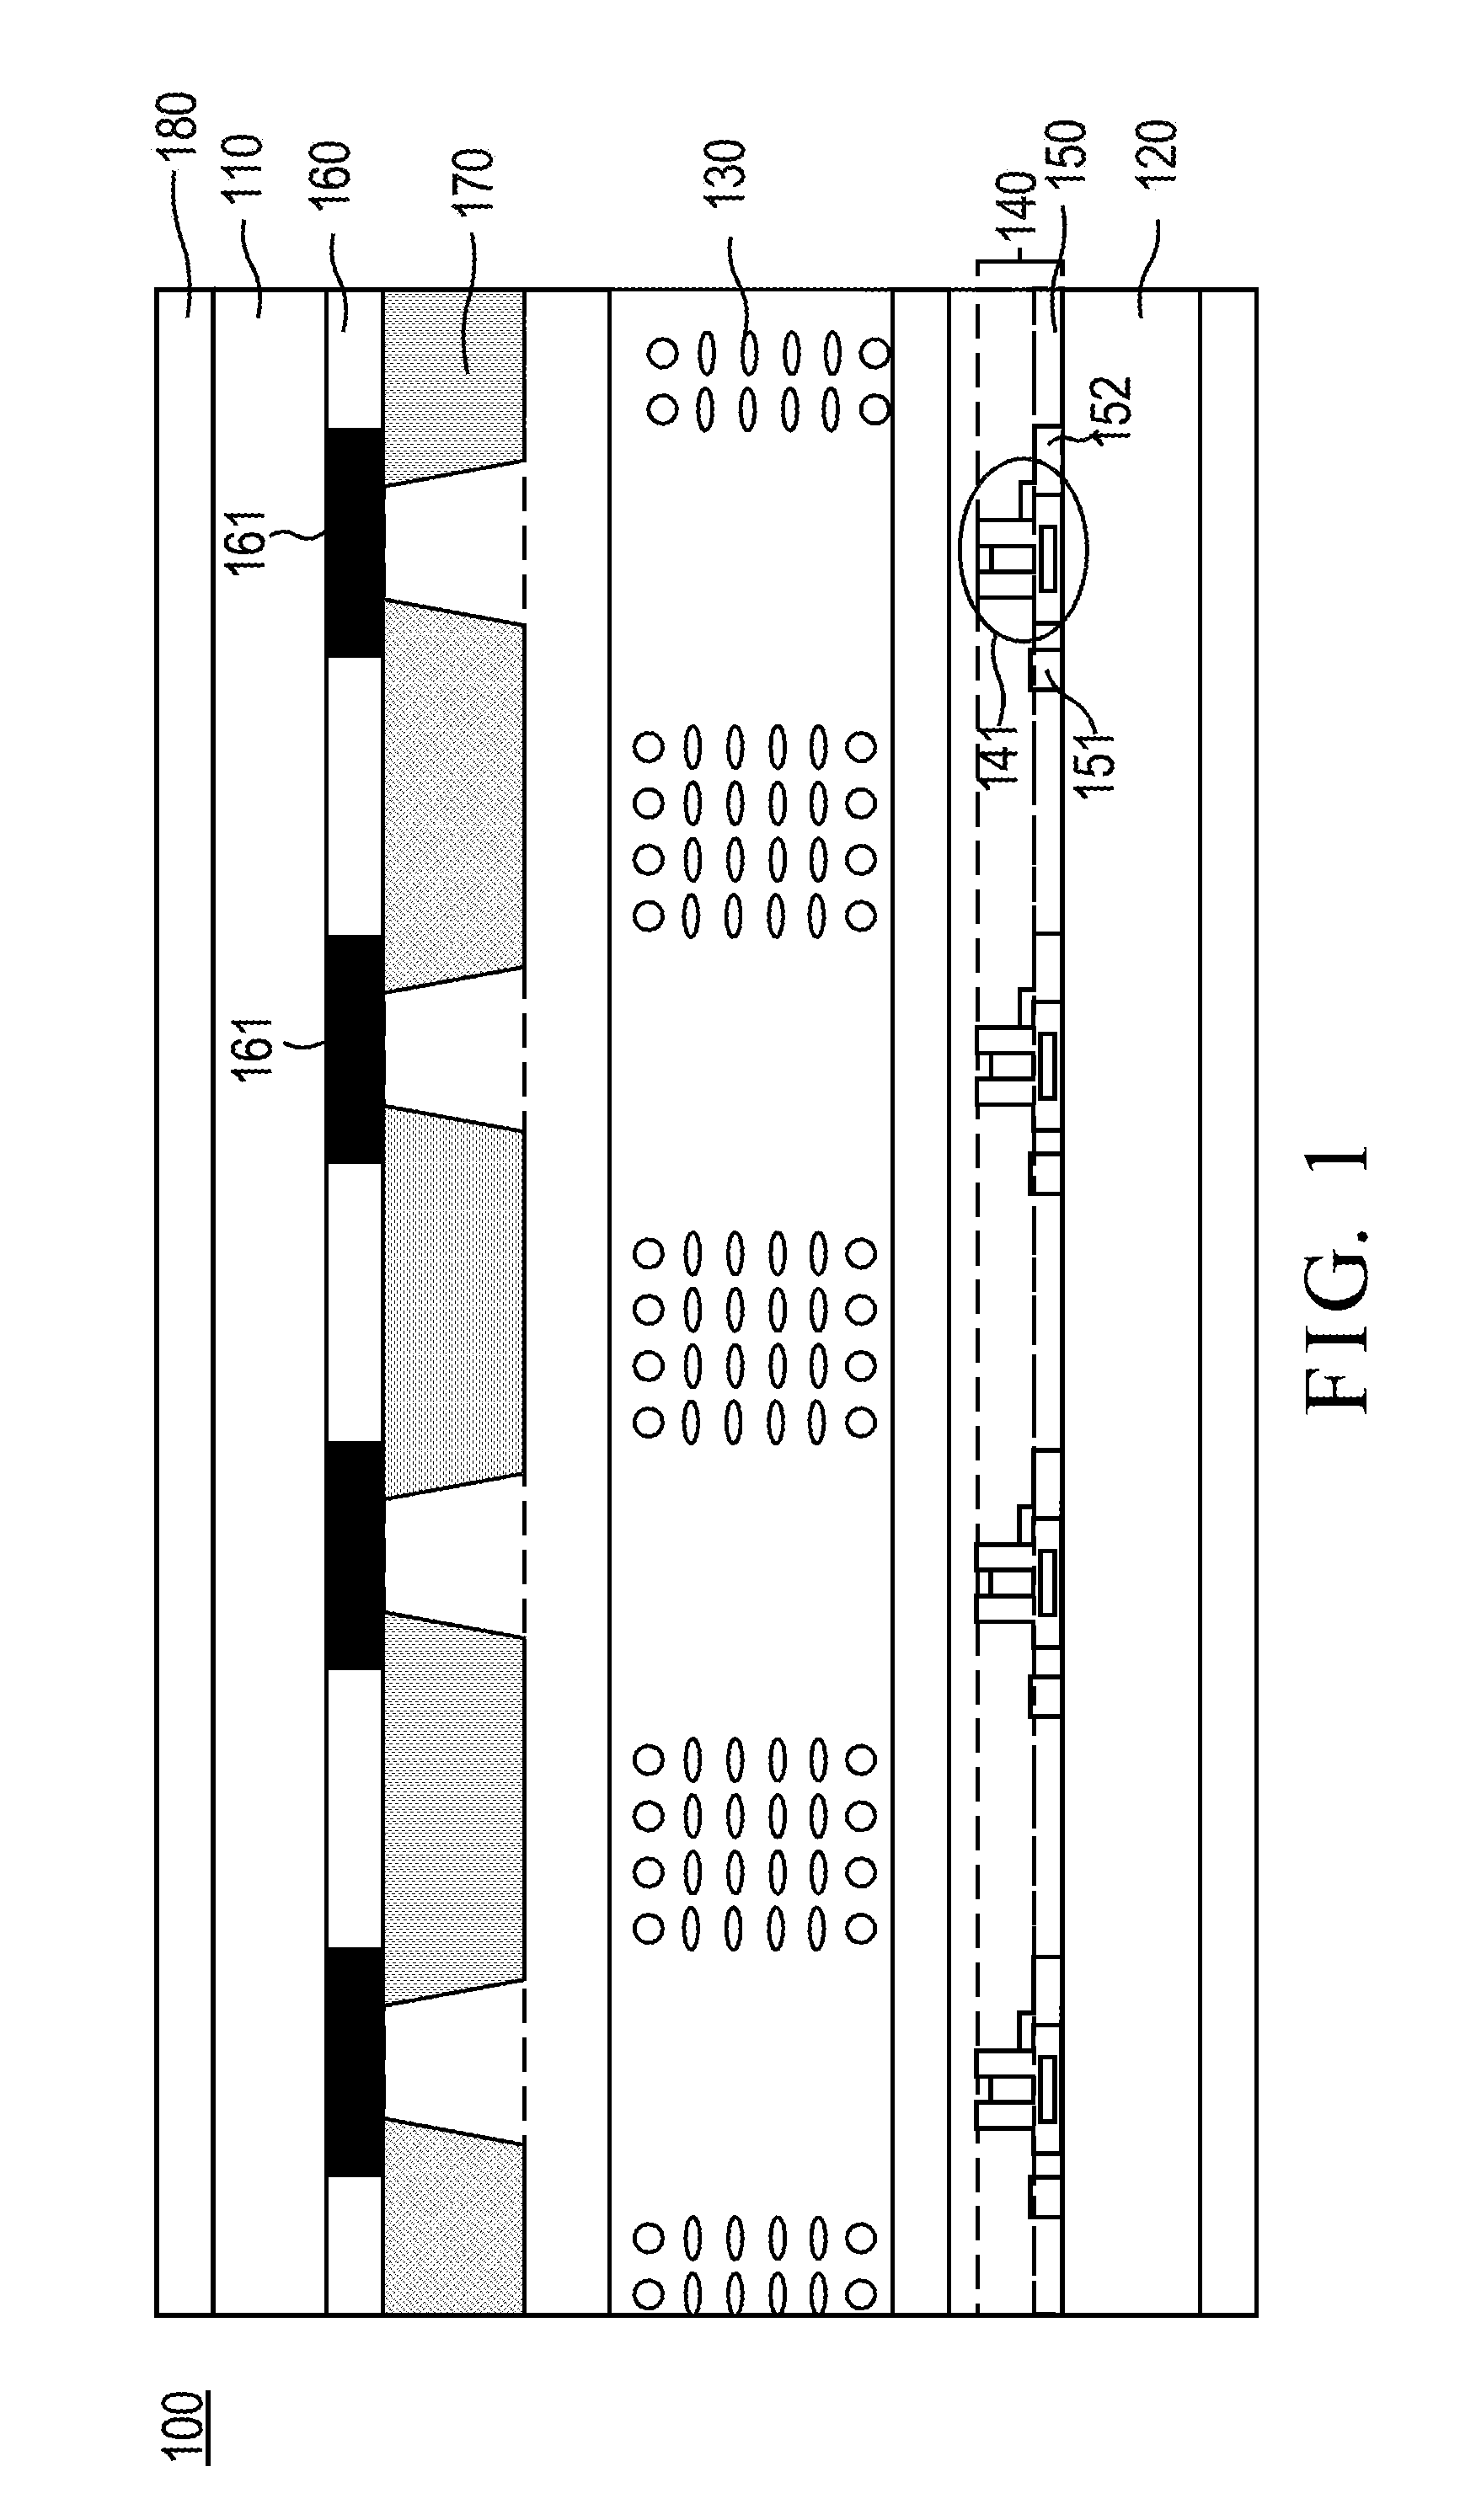 High-sensitivity in-cell touch display device